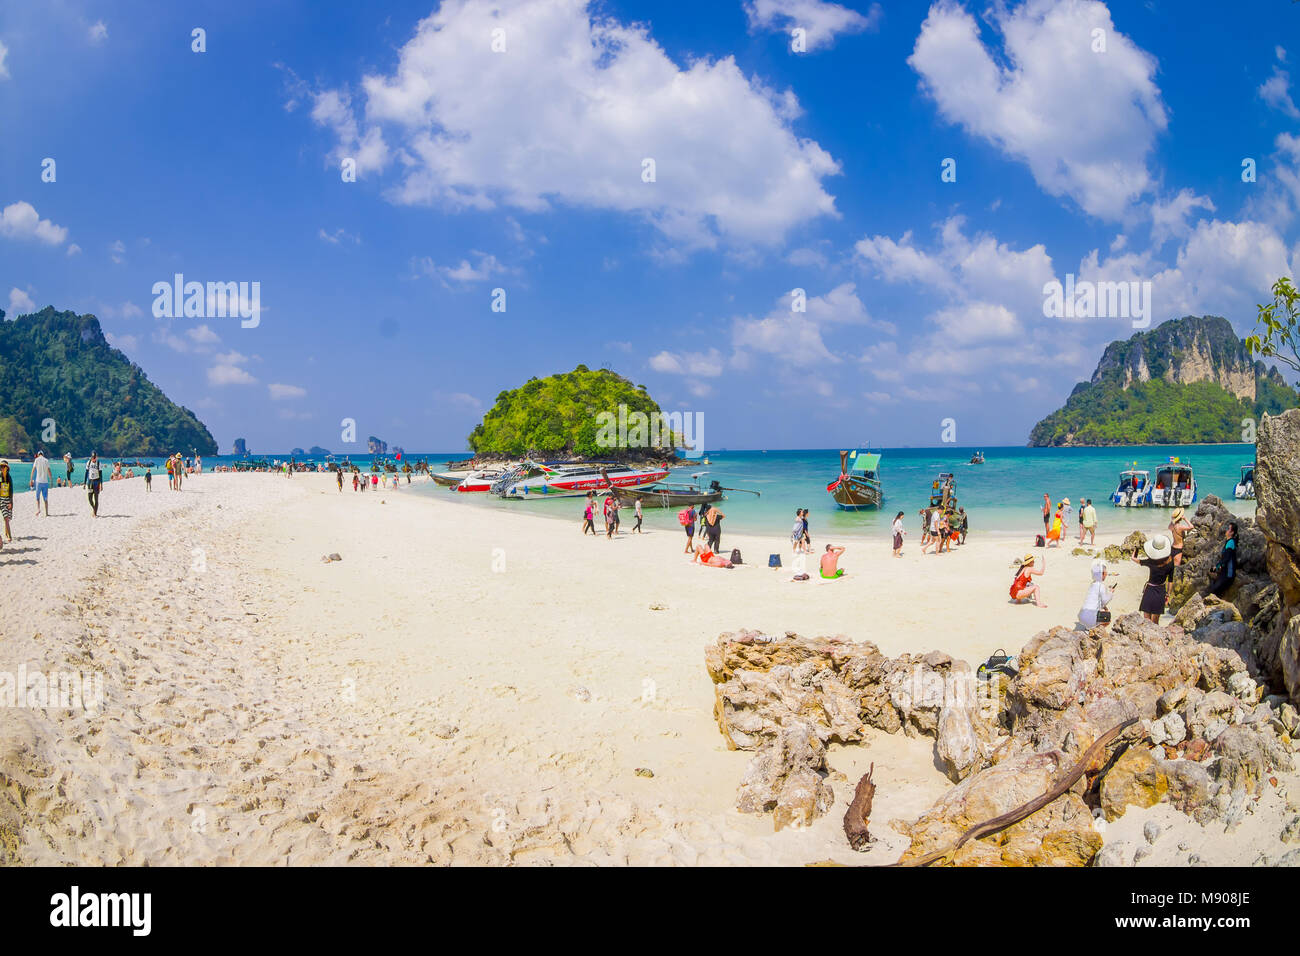 TUP, THAILAND - FEBRUARY 09, 2018: Amazing view of unidentified people in the beach at shore on Tup island in a gorgeous sunny day and white sand Stock Photo